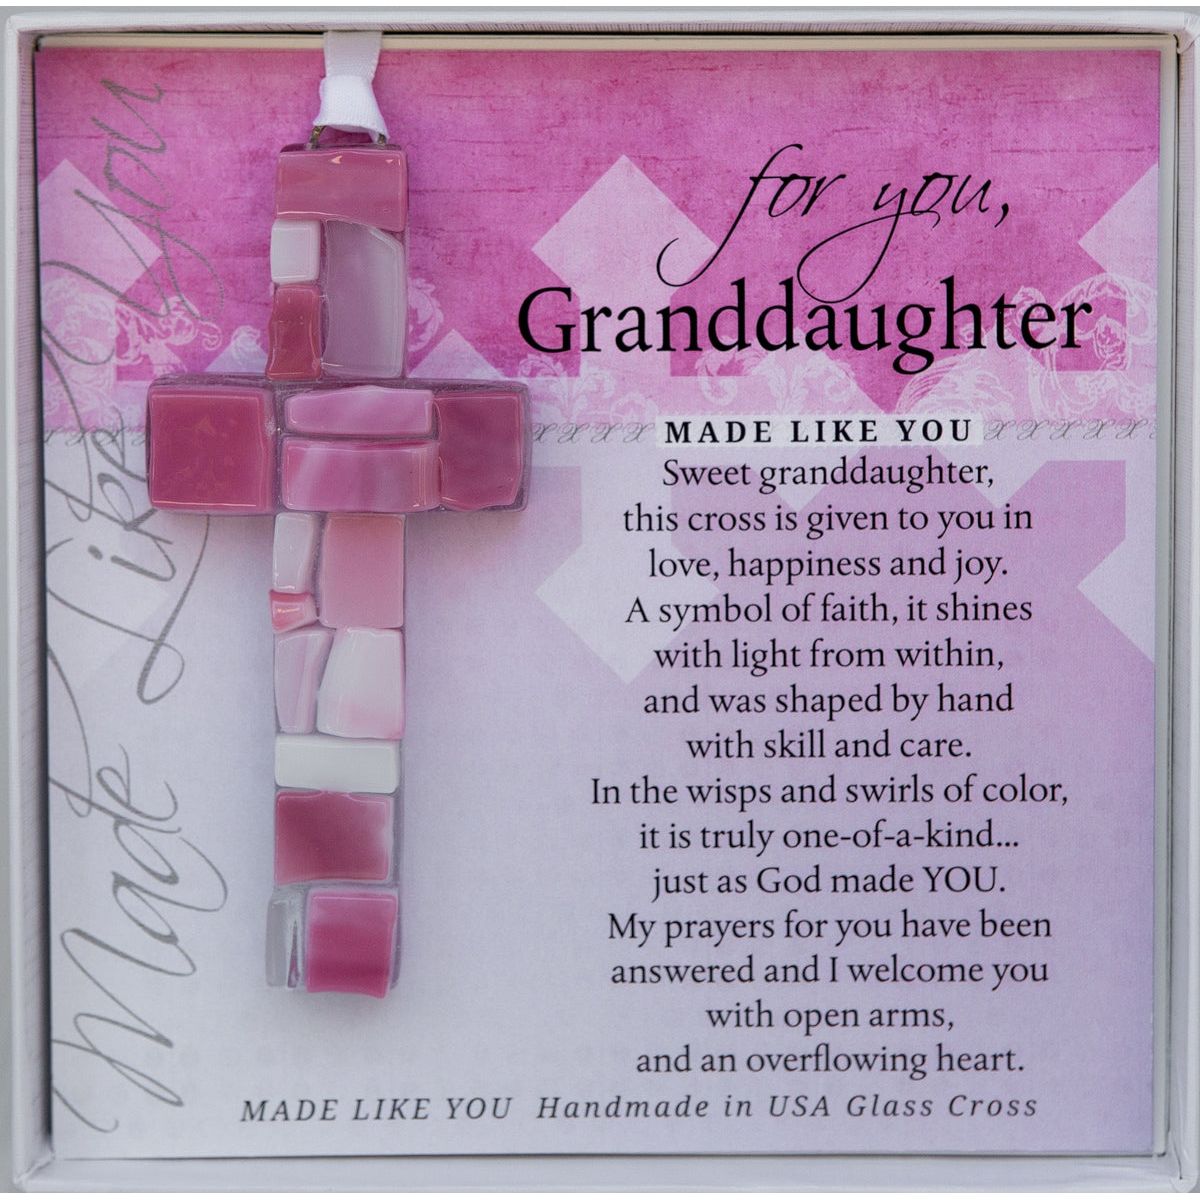 Granddaughter Gift - Handmade 4" pink mosaic glass cross and "For You, Granddaughter" sentiment in white box with clear lid.